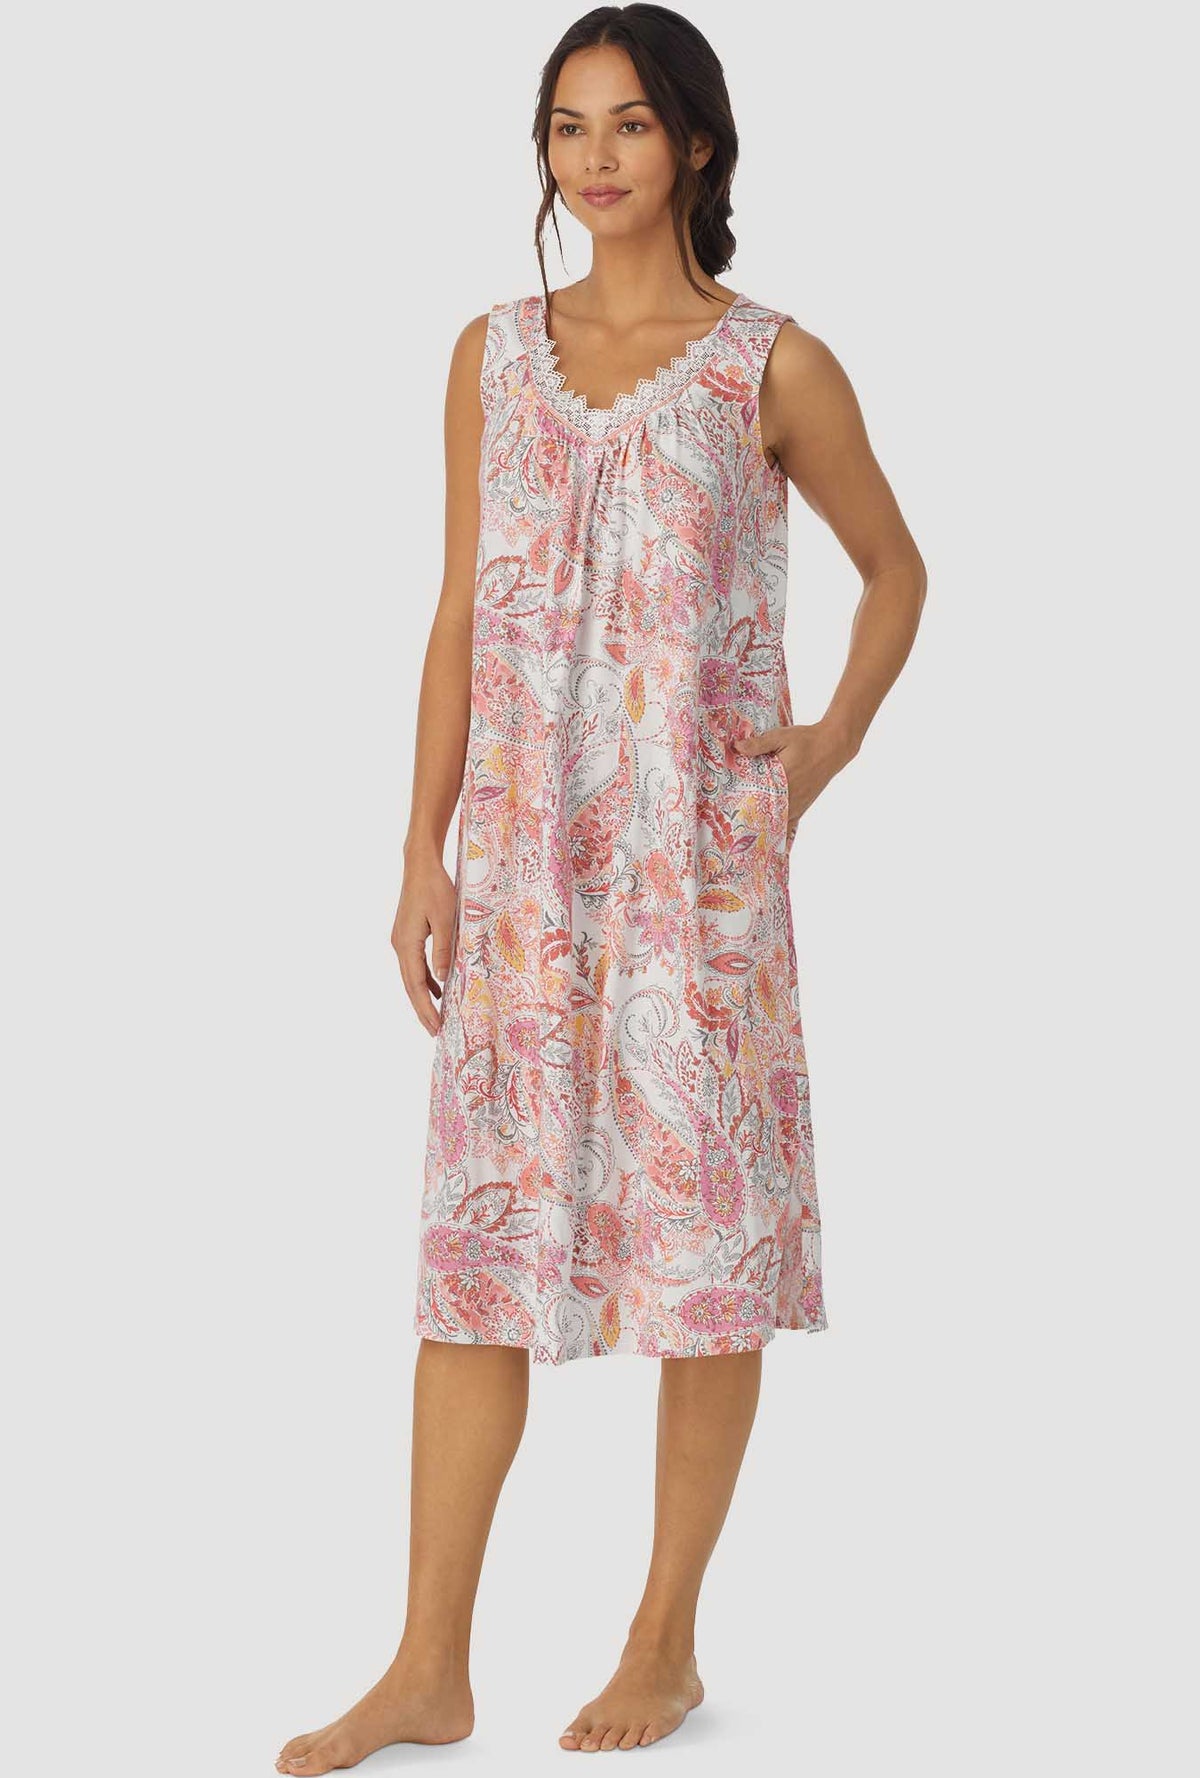 Coral Paisley Sleeveless Ballet Nightgown